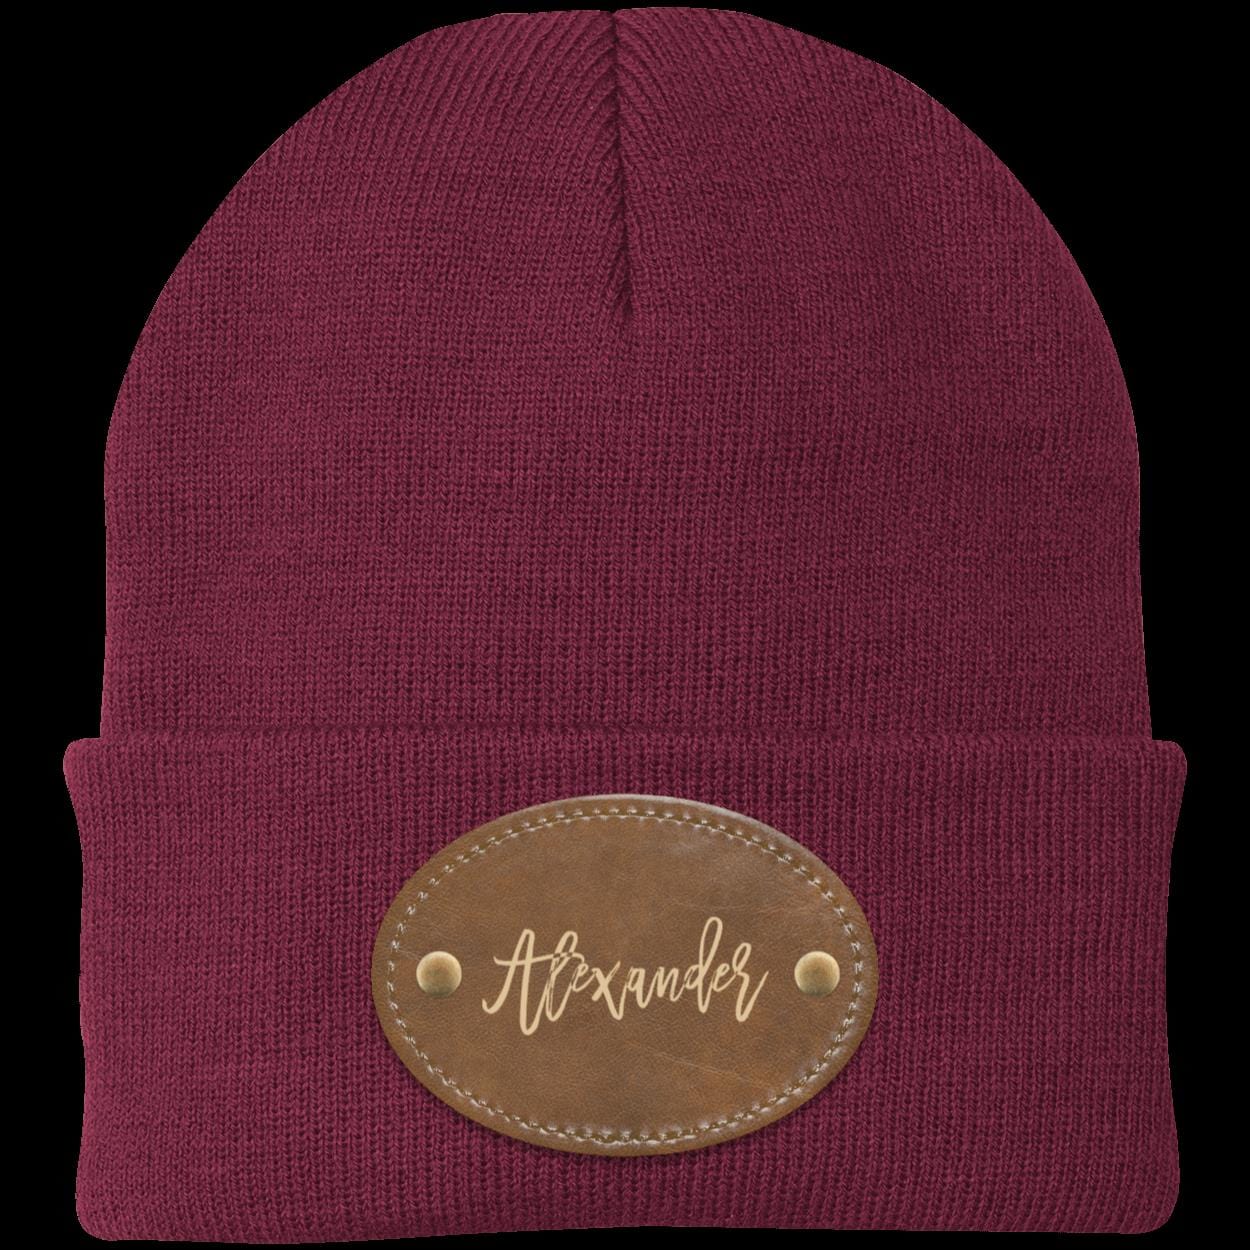 Personalized Custom Vegan Leather Patch Beanie - Your Name, Your friend's Name, Your Cat's Name, You Decide - BespokeBliss